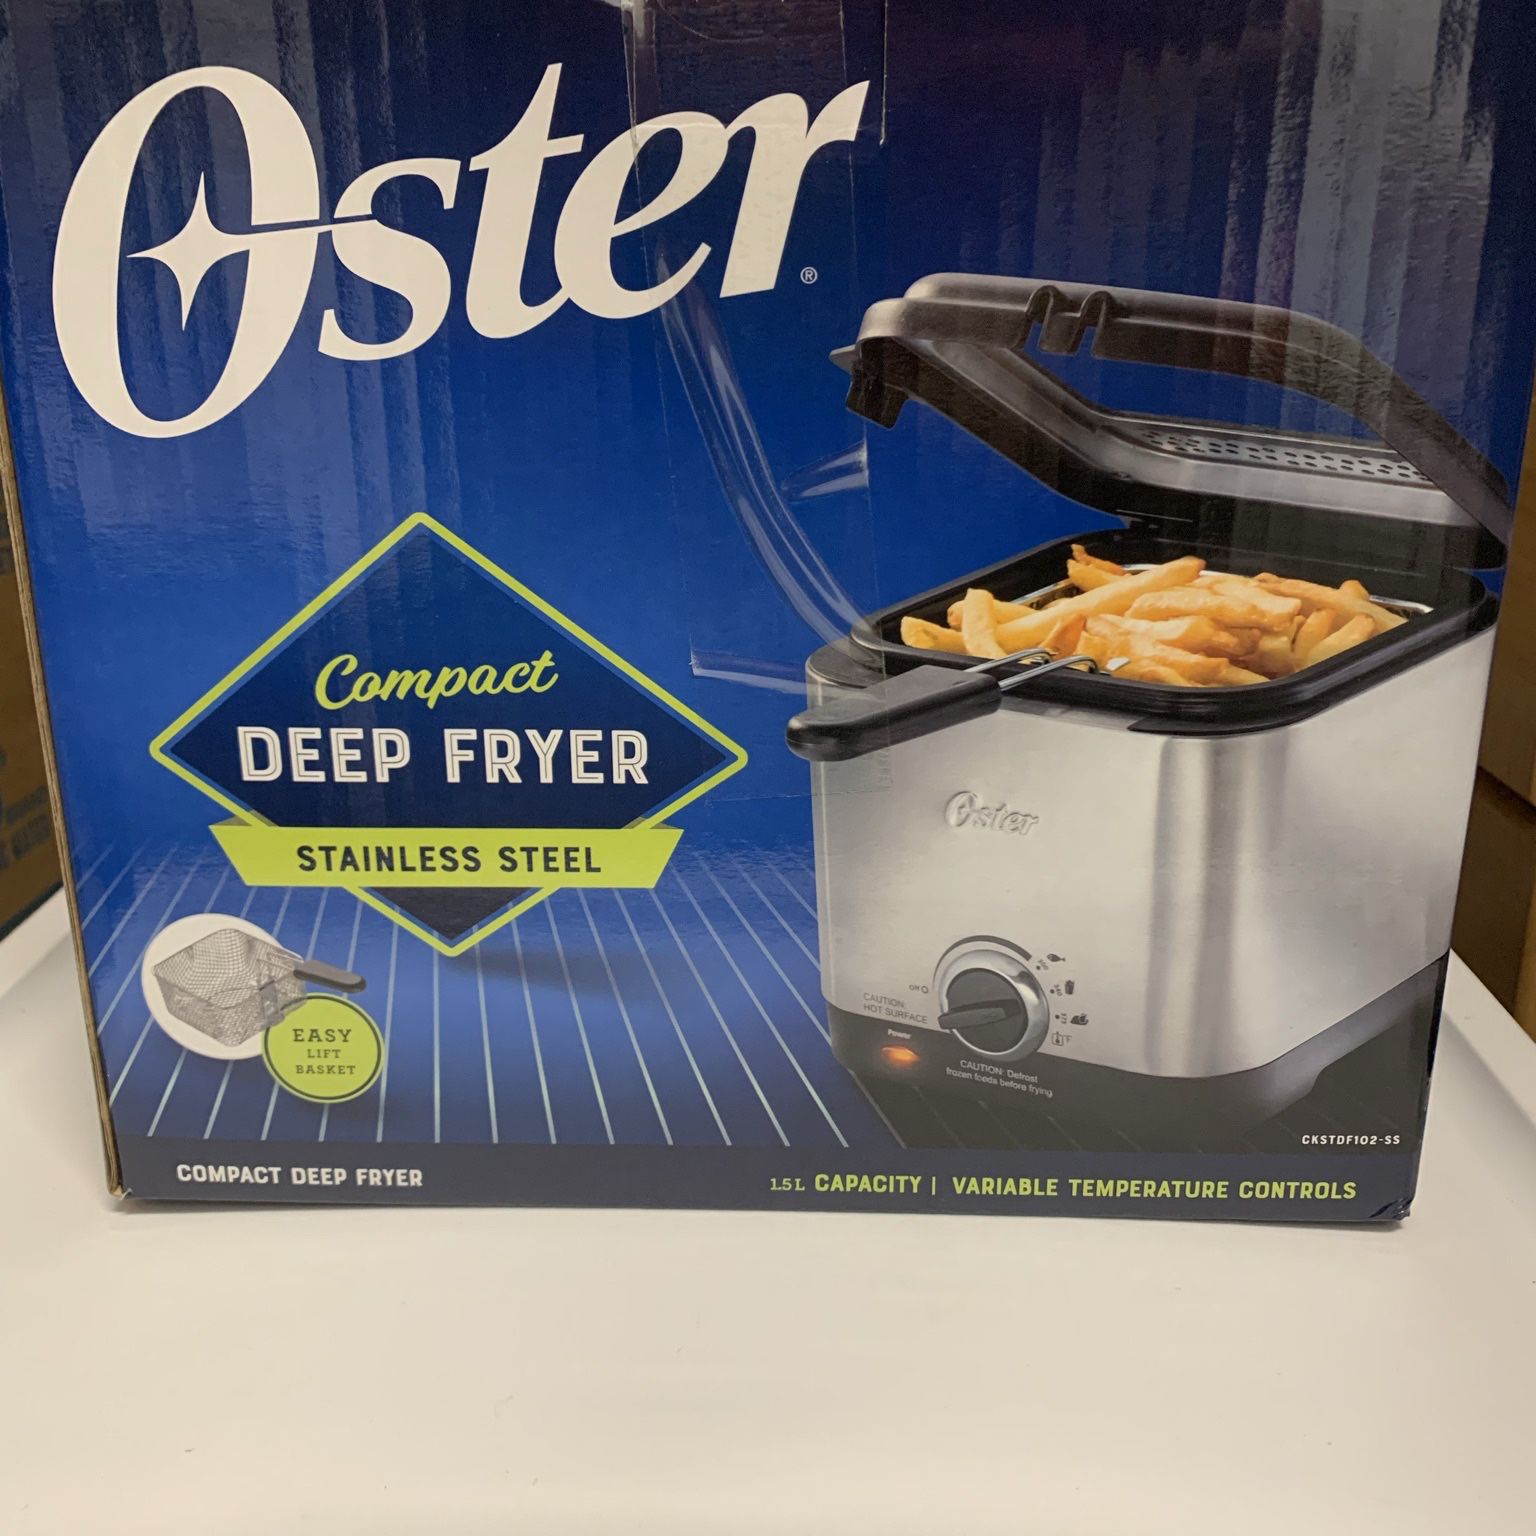 Oster Compact Deep Fryer for Sale in Pompano Beach, FL - OfferUp